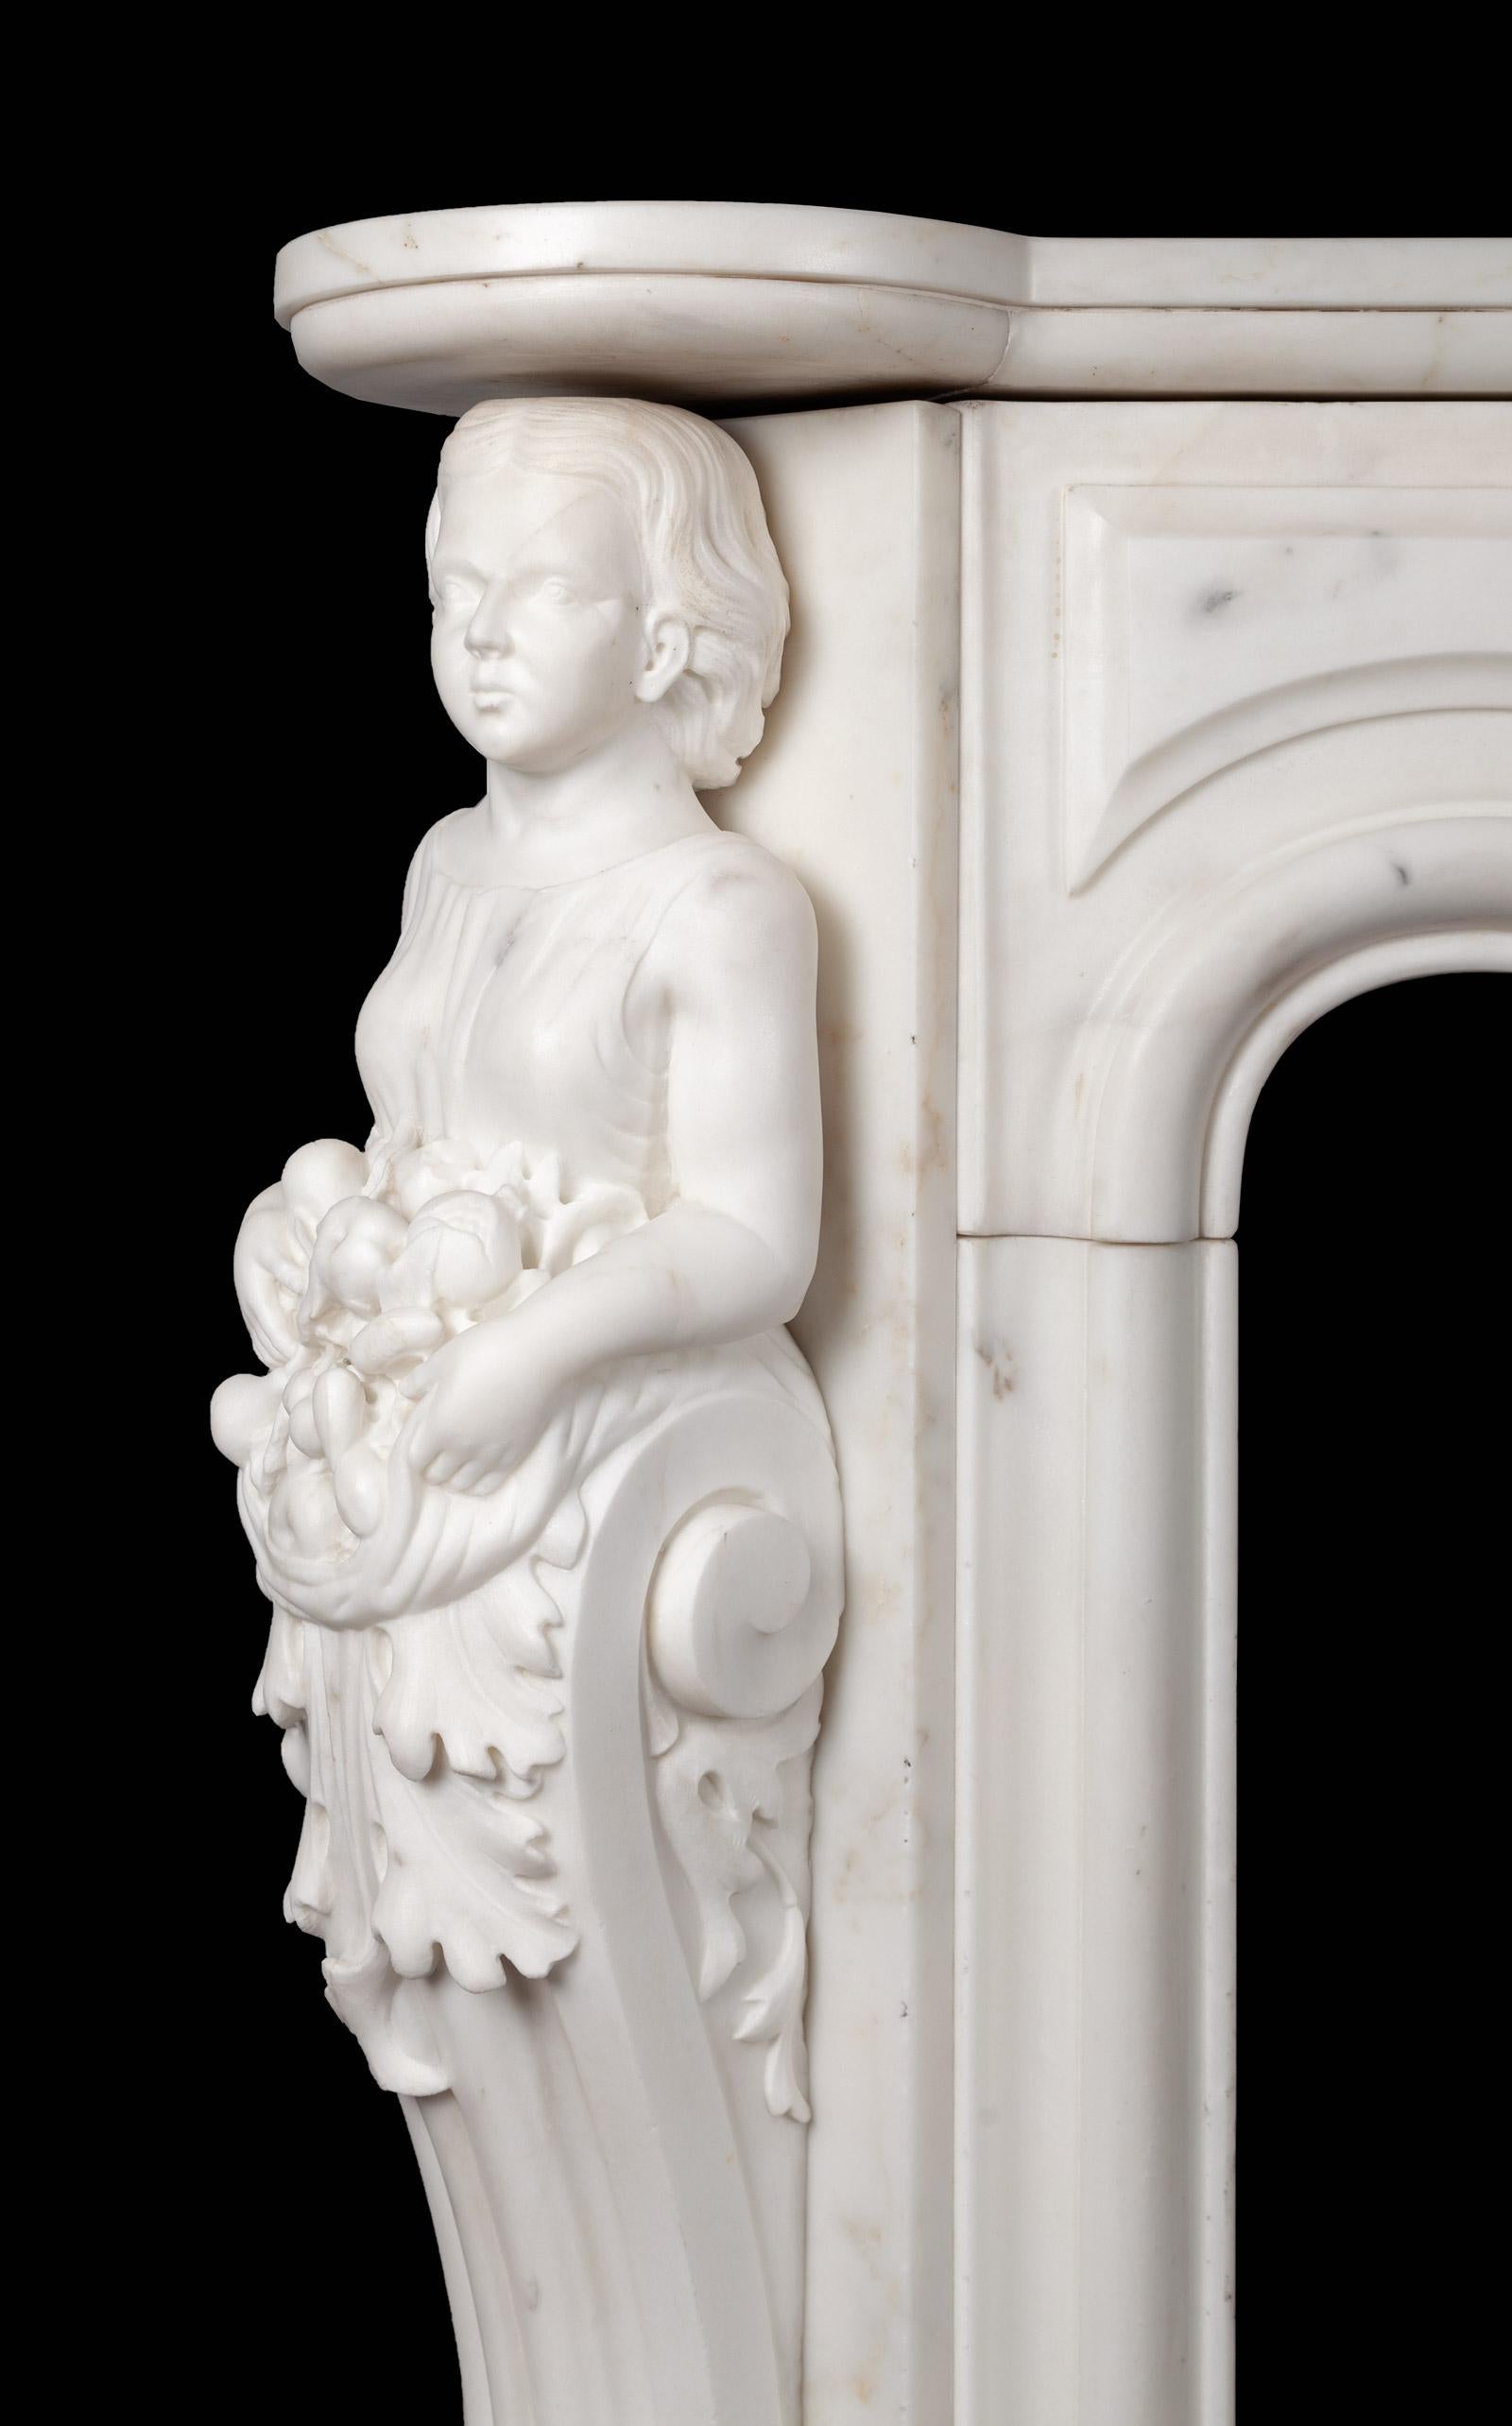 An antique French figurative Statuary Carara marble mantel in the Louis XV style. This rare and remarkable French chimneypiece features boldly carved female terms and an intricately carved frieze. The serpentine frieze has rocaille decoration and a